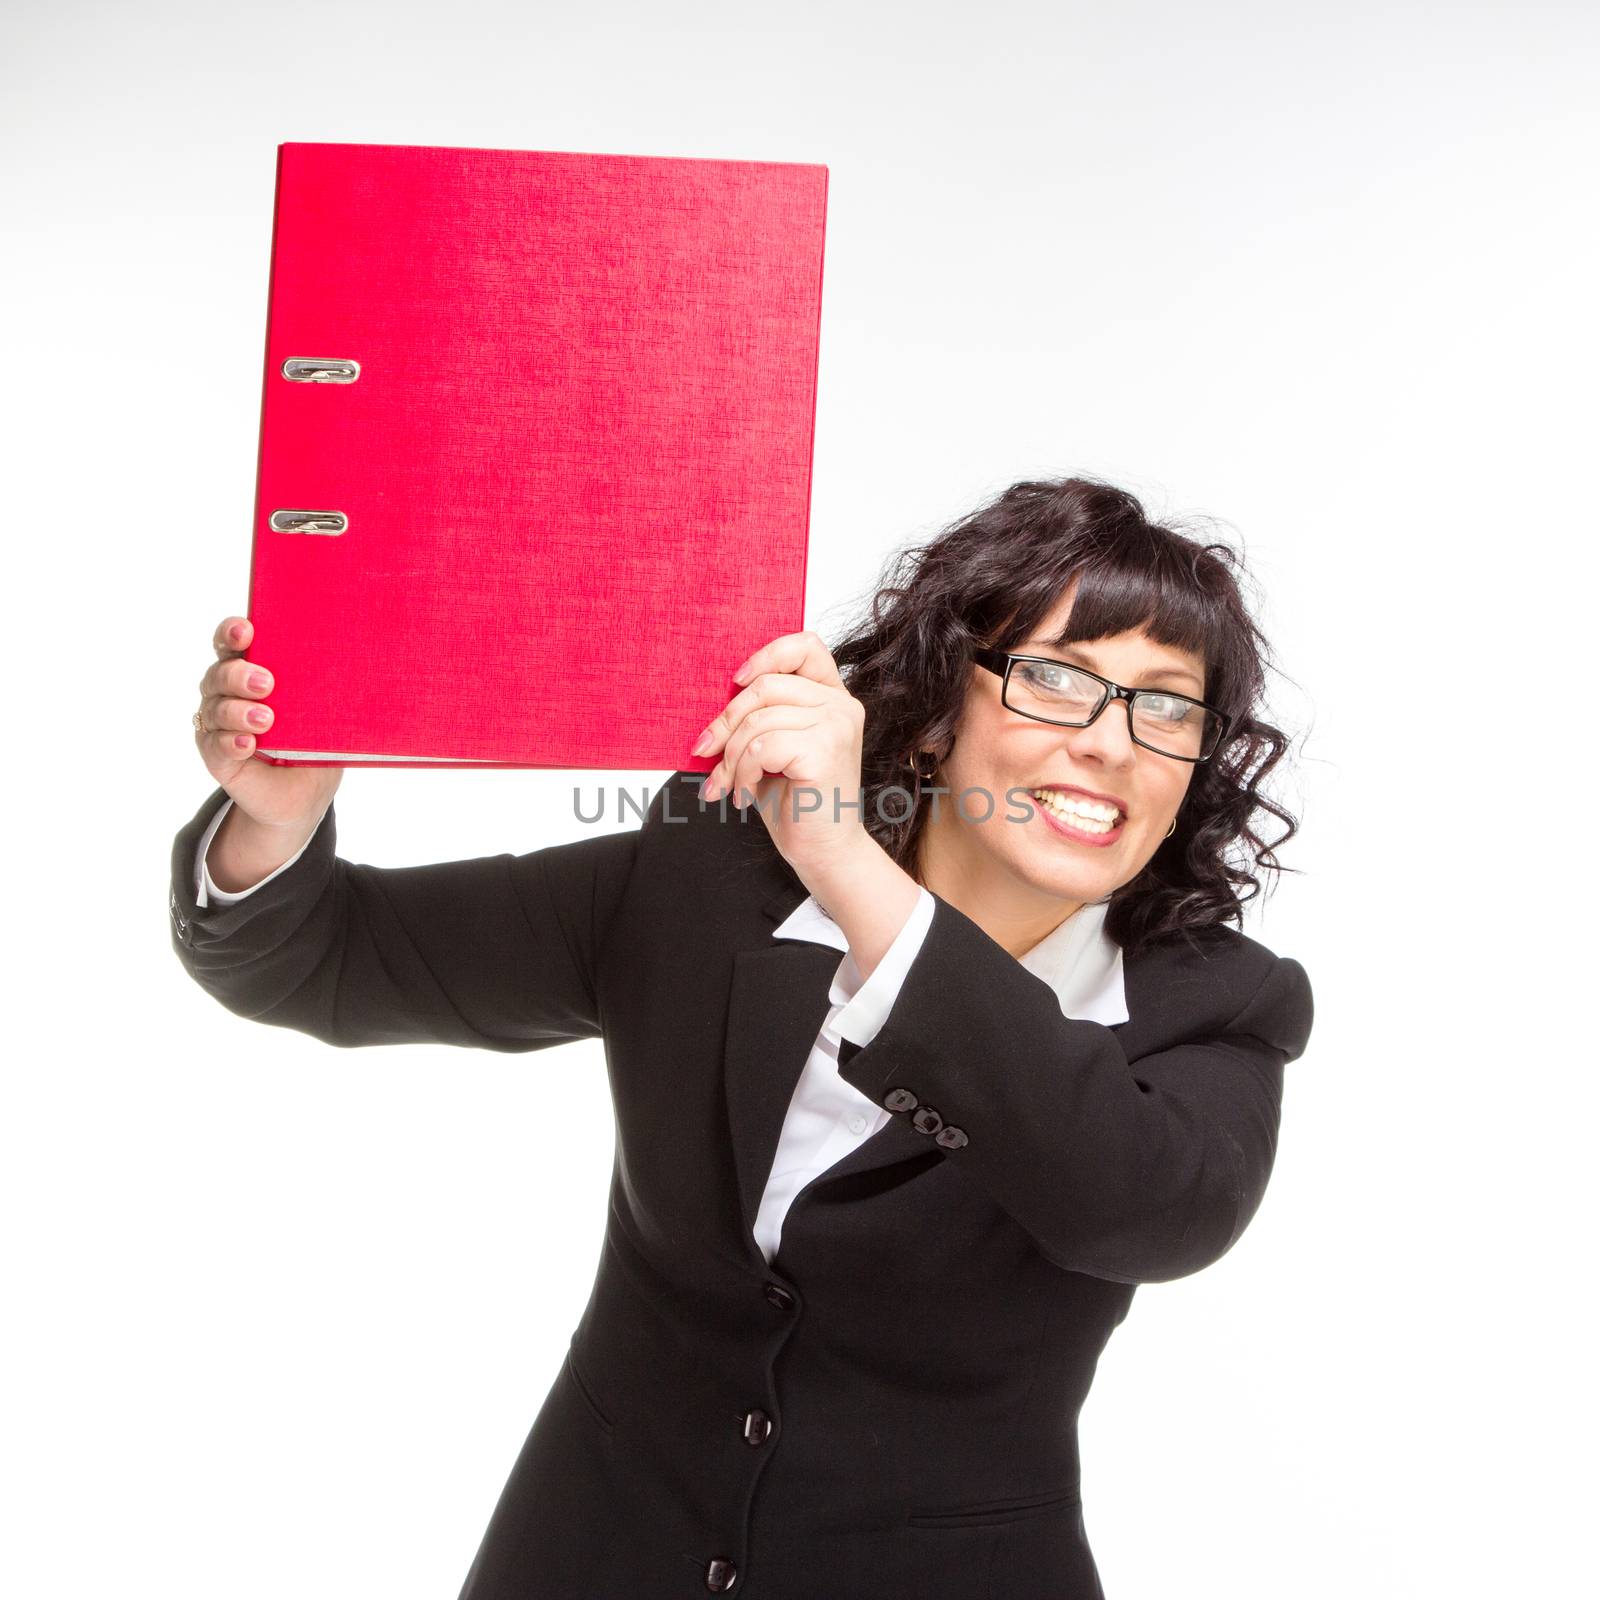 Cheerful senior business woman with folder by gsdonlin